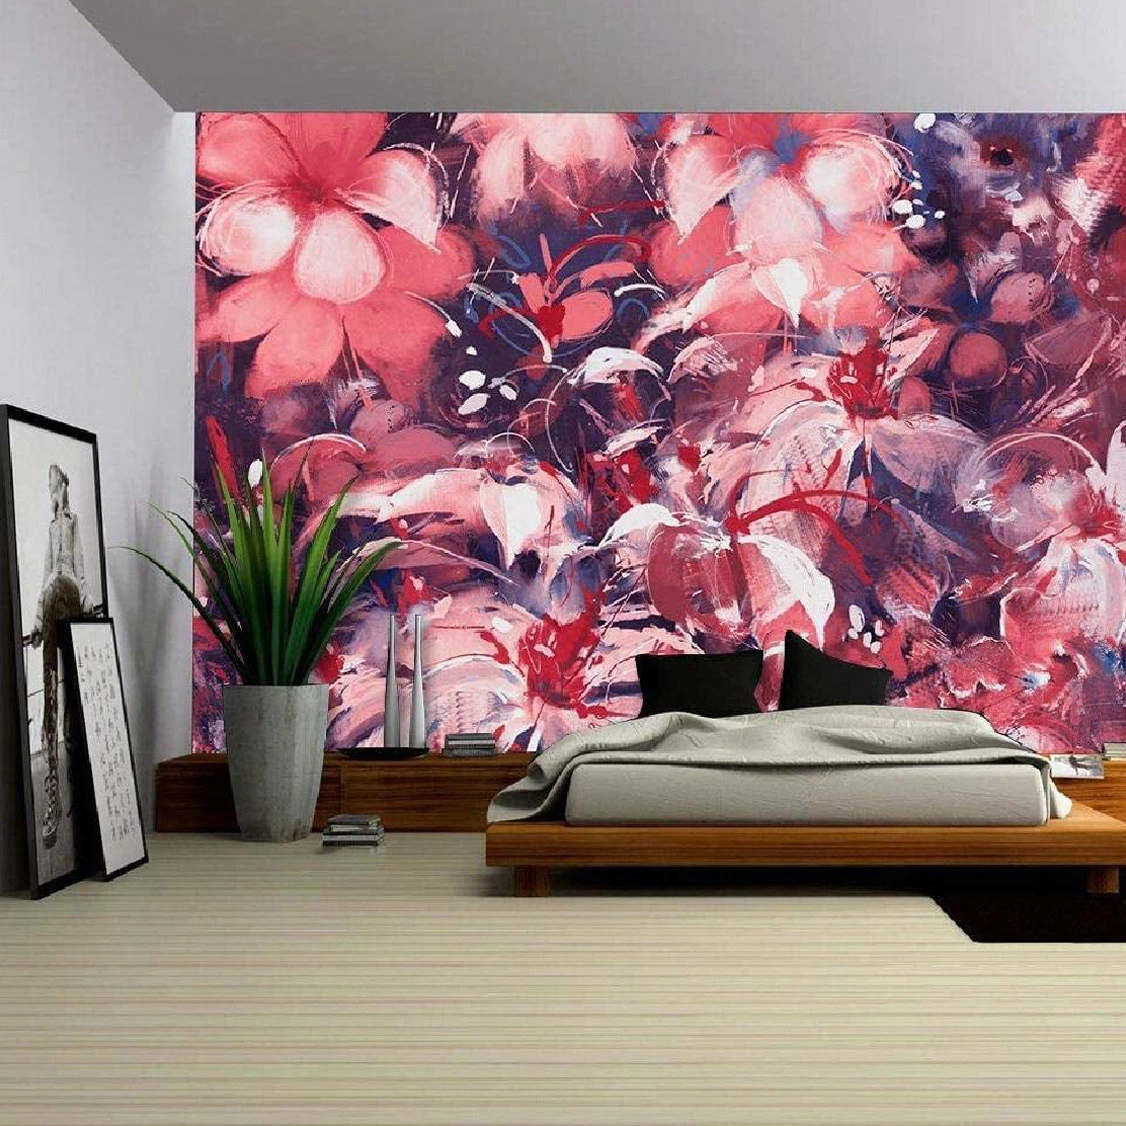 150D Self Adhesive Wall Covering Fabric DB211S-3W